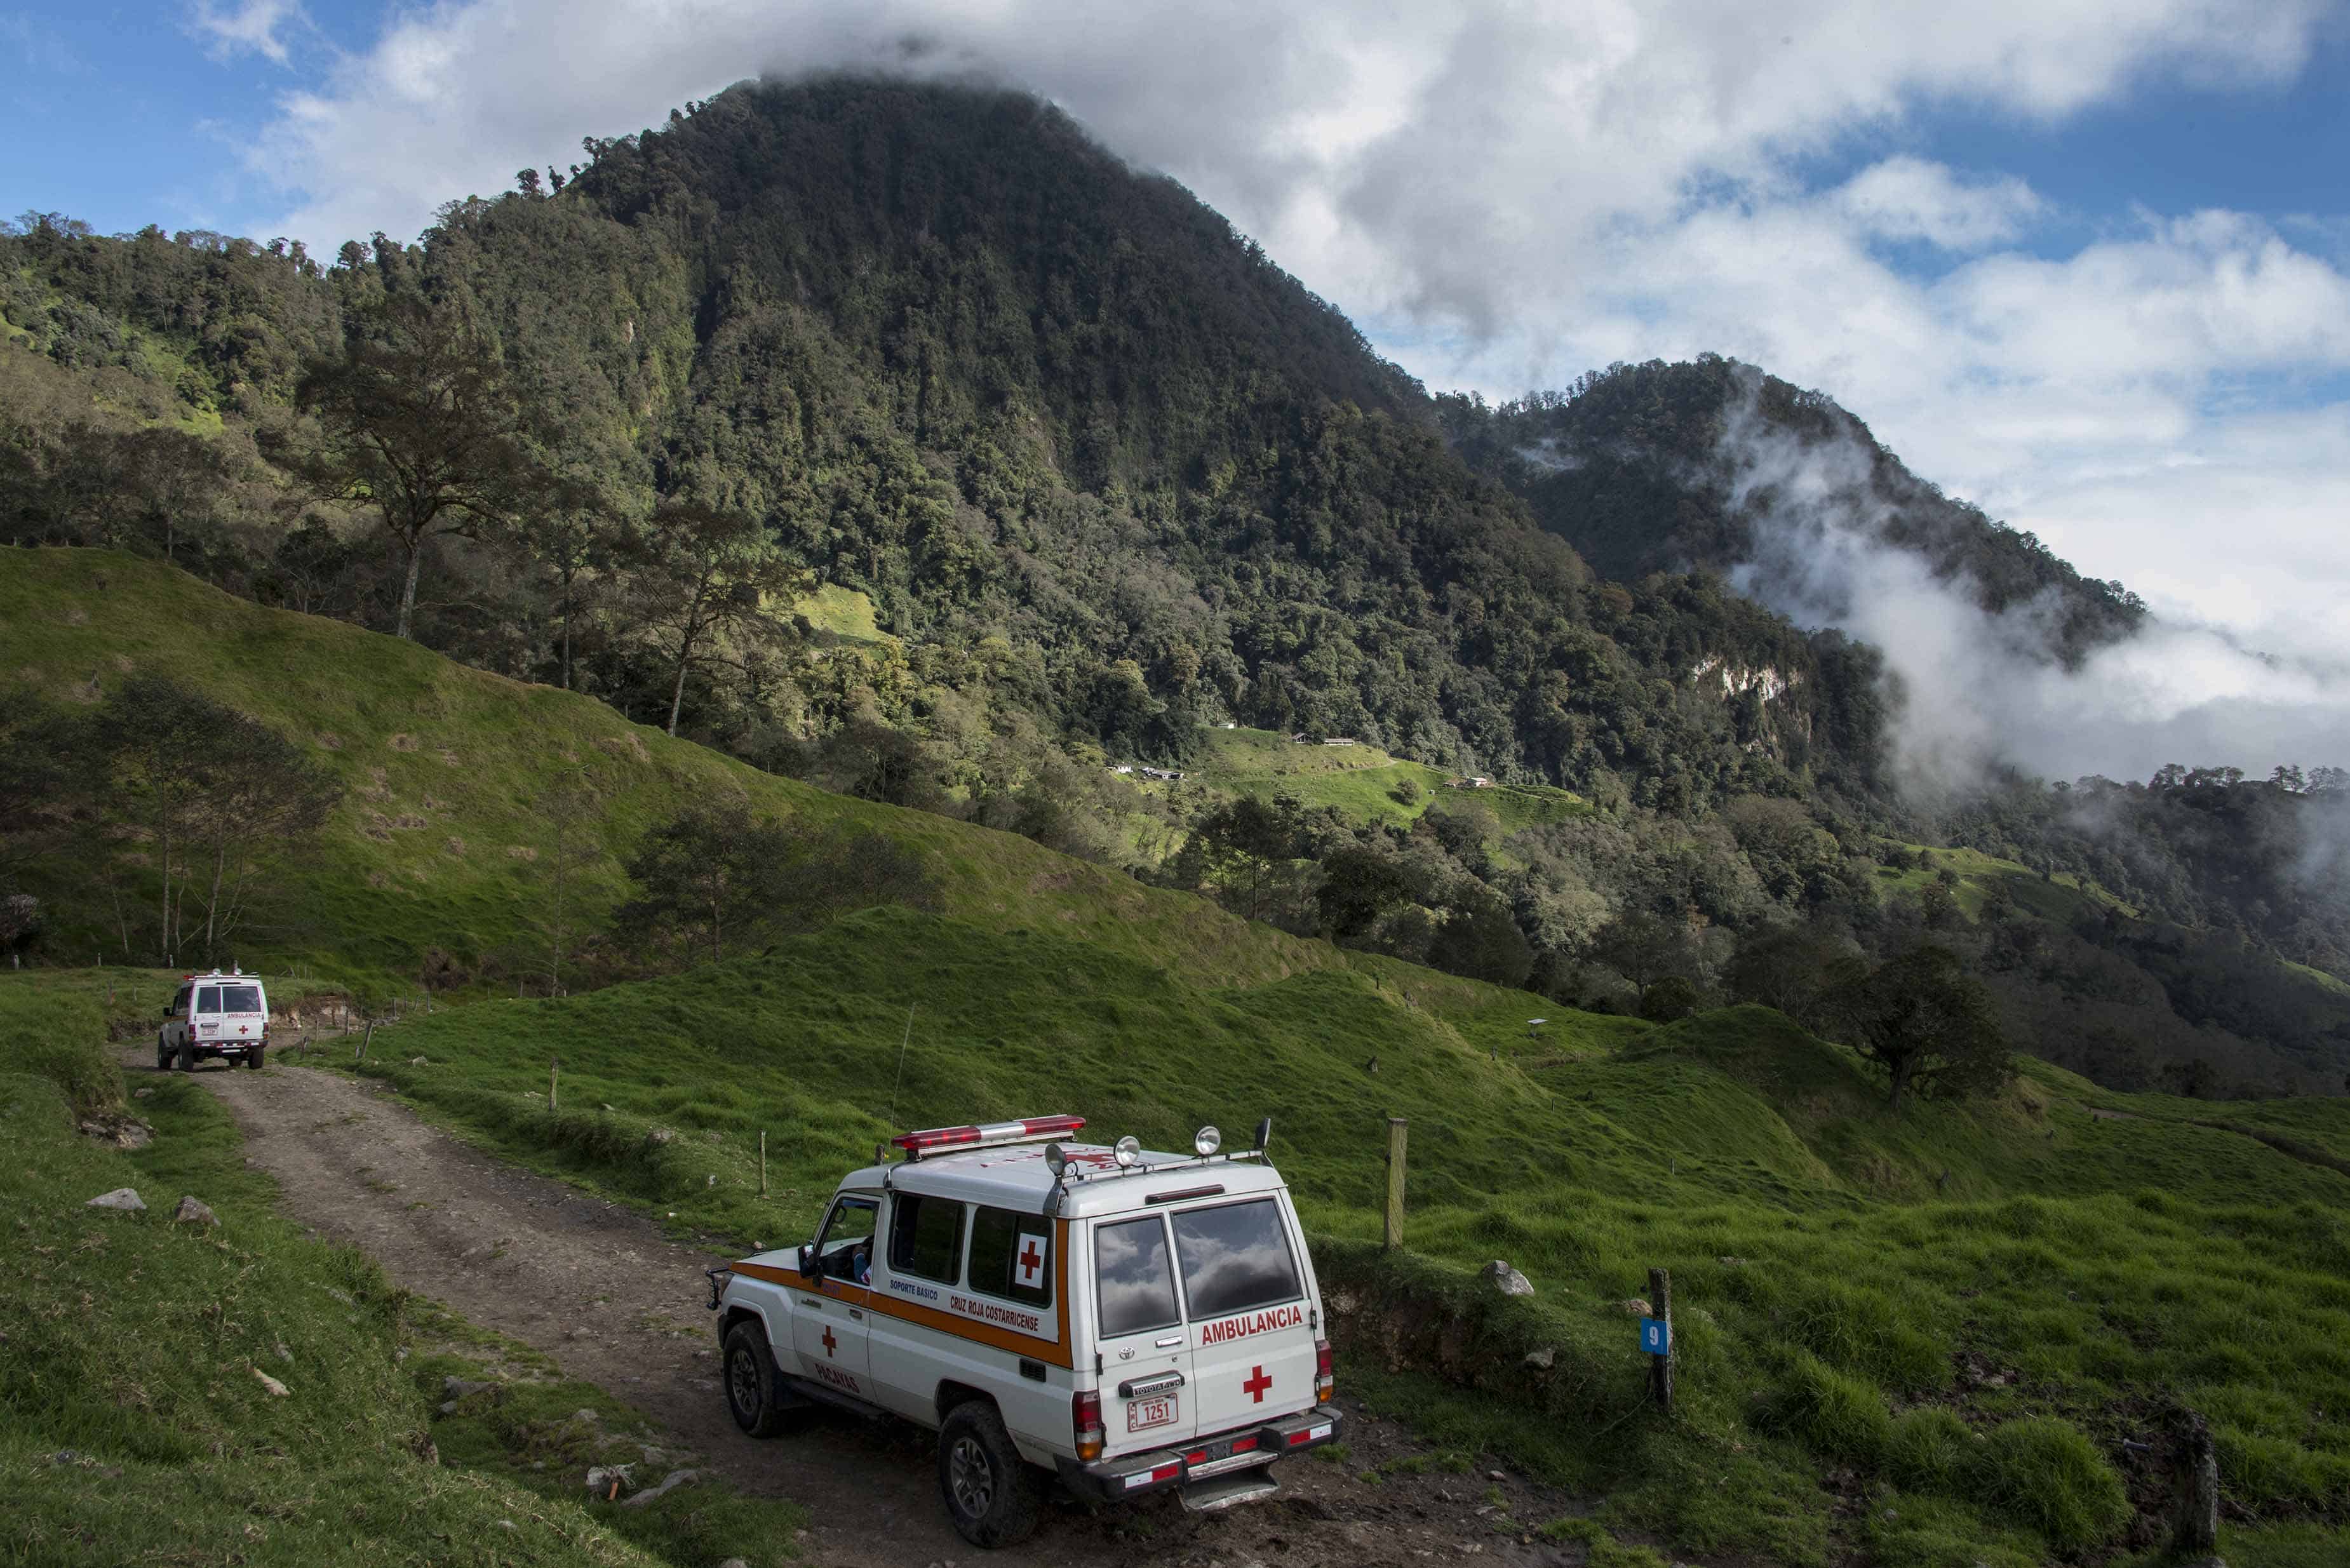 Members of the Costa Rican Red Cross patrol the area surrounding the Turrialba volcano, checking the quality of the air, in San Gerardo de Irazu, 65 km northeast of the San Jose, on March 13, 2015.